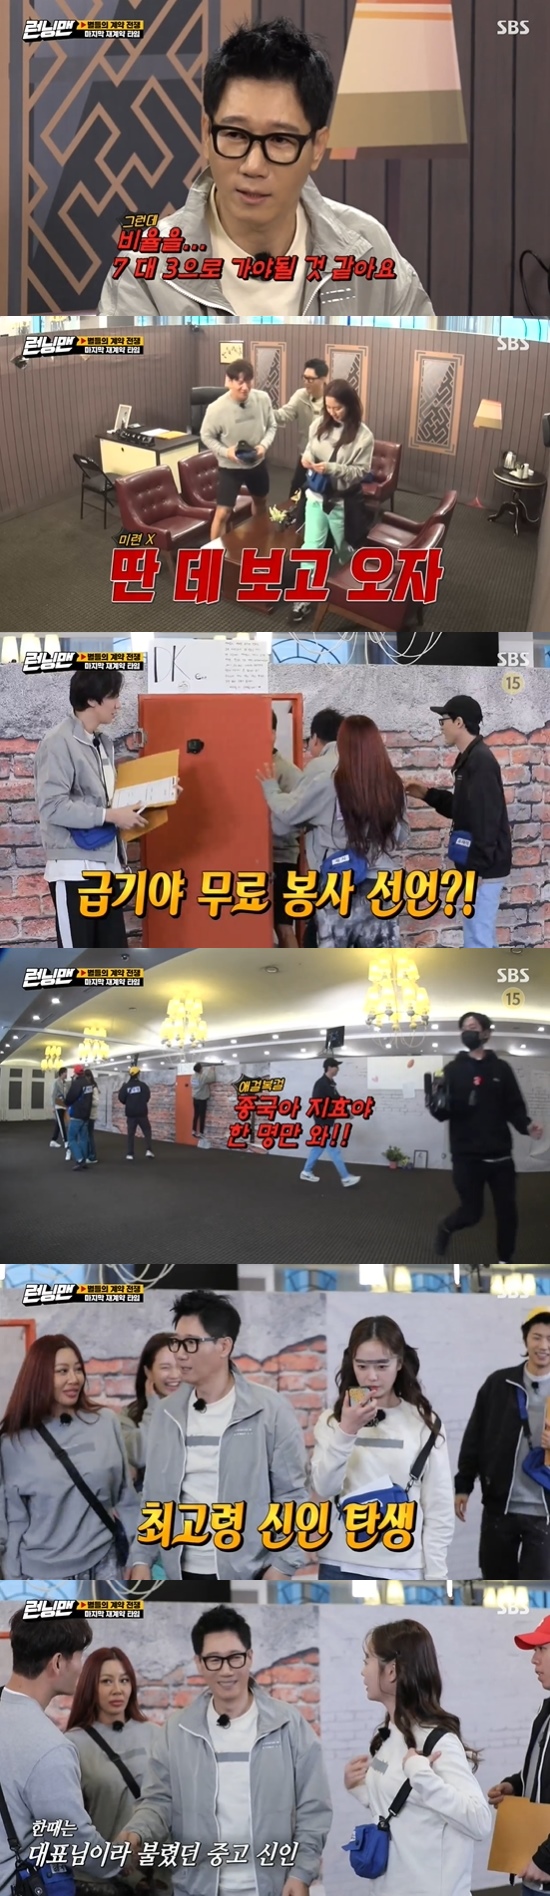 With Running Man Jeon So-min and Song Ji-hyo in the top spot, Ji Suk-jin, Jessie, Haha and Jung Wooyoung will be punished for signing.On the 28th SBS Good Sunday - Running Man, the contract war of stars began.On that day, Ji Suk-jin, Jeon So-min, Yang Se-chan and Lee Kwang-soo became representatives of entertainment; it was Race, who signed as many entertainers as possible.Ji Suk-jin attempted to collate, saying, Lets meet the ratio between representatives, and Lee Kwang-soo agreed, Do you not think to give me more than 5:5?But when celebrities such as Jessie, Jung Wooyoung, Kim Jong-kook, Song Ji-hyo, Yoo Jae-Suk, and Yang Se-chan appeared, the representatives changed the terms of the contract to recruit.Jeon So-min signed Jung Wooyoung, Ji Suk-jin signed Kim Jong-kook and Song Ji-hyo, and Haha signed with Yoo Jae-Suk and Jessie.Lee Kwang-soo cut off the back of his head to catch Yang Se-chan, followed by the showcase of the four major entertainers; first place was Jessie.After Showcase, the time for the renewal came back: Haha, who saw the organs of Yoo Jae-Suk, said, I think Mr. Jae-seok should do more work.We look like shit, he said.Ji Suk-jin also told Song Ji-hyo and Kim Jong-kook that they would have to change their contract to 7:3, while Kim Jong-kook and Song Ji-hyo went to Baro Haha Enter.Haha said, I know you two are dating, but I will not let you leak out. The two also laughed, Do you want to keep secrets?Lee Kwang-soo succeeded in signing Yoo Jae-Suk and Jessie, and Jeon So-min signed with Jung Wooyoung and hired Yang Se-chan.Ji Suk-jin, who was urgent, called Song Ji-hyo, Kim Jong-kook 10-0 to shout the same as the previous contract, plus alpha.However, Ji Suk-jins agency, which no one caught, closed down and became an entertainer of Lee Kwang-soos agency after paying 300,000 won for the closing fee.The first schedule was Yaja Golden Bell, a golden bell quiz that runs until the last agency comes out.When I told the crew that I should also speak to them, Yoo Jae-Suk called the main camera director of Baro 36 years and laughed.In the first issue, Jessie and Lee Kwang-soo were eliminated; Ji Suk-jin, who was discussing the issue, suddenly dropped out of honor, and the members said, Ive known since I was born.But Kim Jong-kook was also eliminated because of his honorific remarks.Song Ji-hyo made the name of the director of the movie Shinsegae a problem, and Yoo Jae-Suk failed to win the first place.The last schedule was Running Entertainment, and Kim Jong-kook and Jung Wooyoung played first.Kim Jong-kook fell down because he could not balance, and Jung Wooyoung expressed confidence that it is the first time I have confidence in the end.After all, Jung Wooyoungs victory; next is a matchup between Ji Suk-jin and Song Ji-hyo.Ji Suk-jin leaned down to lower his pants, while Song Ji-hyo hit the correct answer when he saw the letter on Ji Suk-jin.Yang Se-chan lured Lee Kwang-soo by putting money down on the floorYang Se-chan asked me to close my eyes because I would give you money, and Lee Kwang-soo said, If you give me 10,000 won, I will close it all if I give you 20,000 won.Yang Se-chan pretended to throw money and turned one lap while Lee Kwang-soo looked at the floor; when both failed to shout the correct answer, the crew suggested a struggle.The final result was that the first of the agencys representatives was Jeon So-min; the second was Lee Kwang-soo. The first of the entertainers was Song Ji-hyo and Kim Jong-kook.Haha, Ji Suk-jin, Jessie, and Jung Wooyoung were penalized. The penalty was 100 autographs.Photo = SBS Broadcasting Screen